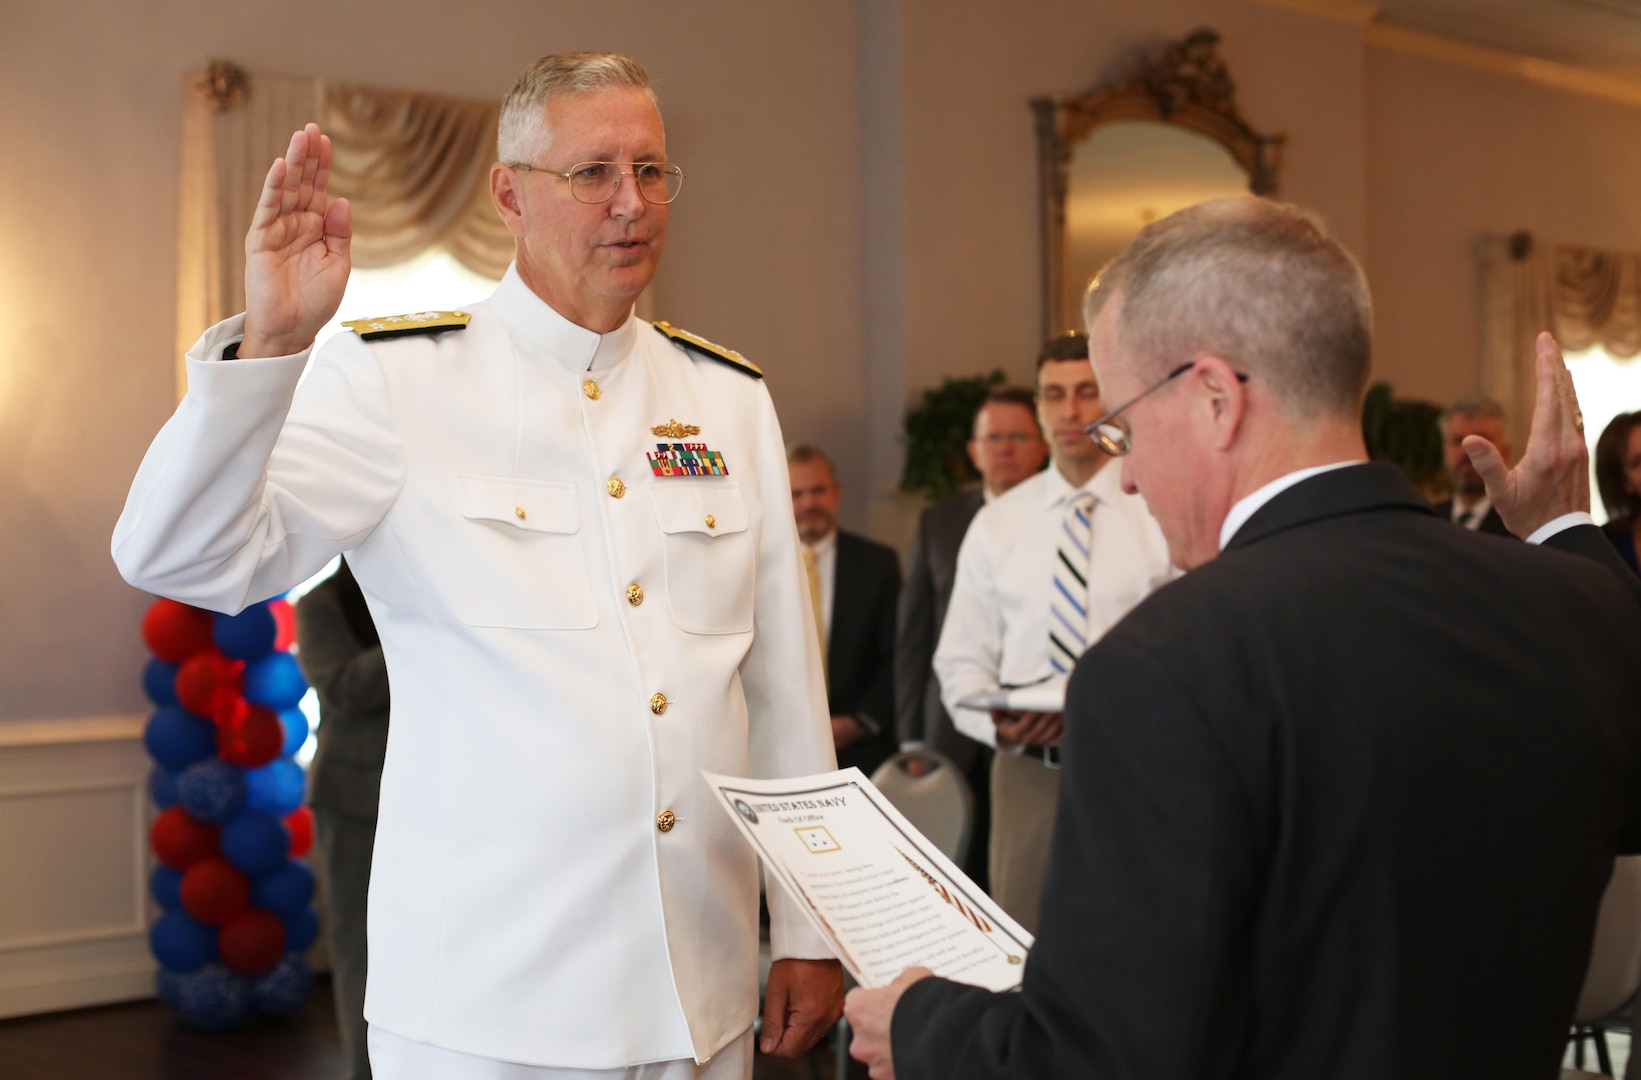 Navy Vice Adm. David H. Lewis reaffirms his oath during his promotion ceremony at Fort Lee, Virginia, May 24. Later that day, Lewis assumed command of the Defense Contract Management Agency. James MacStravic, performing the duties of undersecretary of defense for acquisition, technology and logistics, officiated both ceremonies. (DCMA photo by Stephen Hickok)